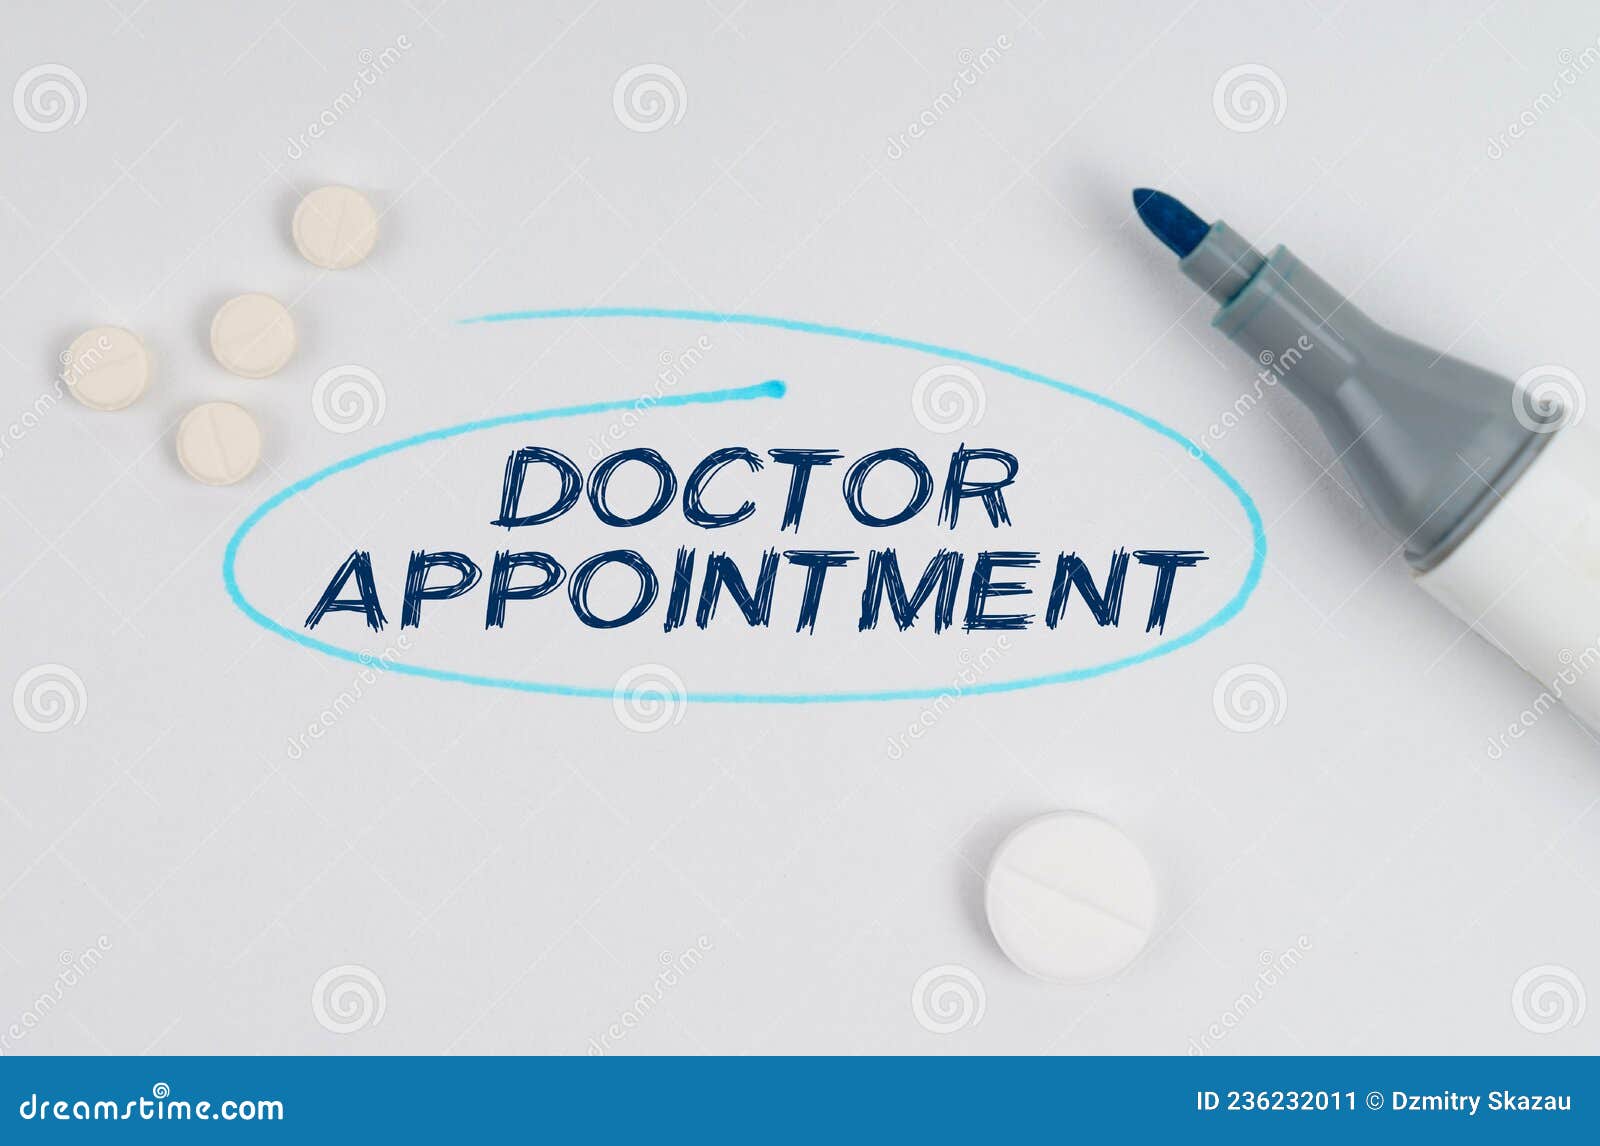 On a White Sheet of Paper, Tablets, a Marker and an Inscription - DOCTOR  APPOINTMENT Indicated by a Drawn Oval. Stock Image - Image of health,  hospital: 236232011